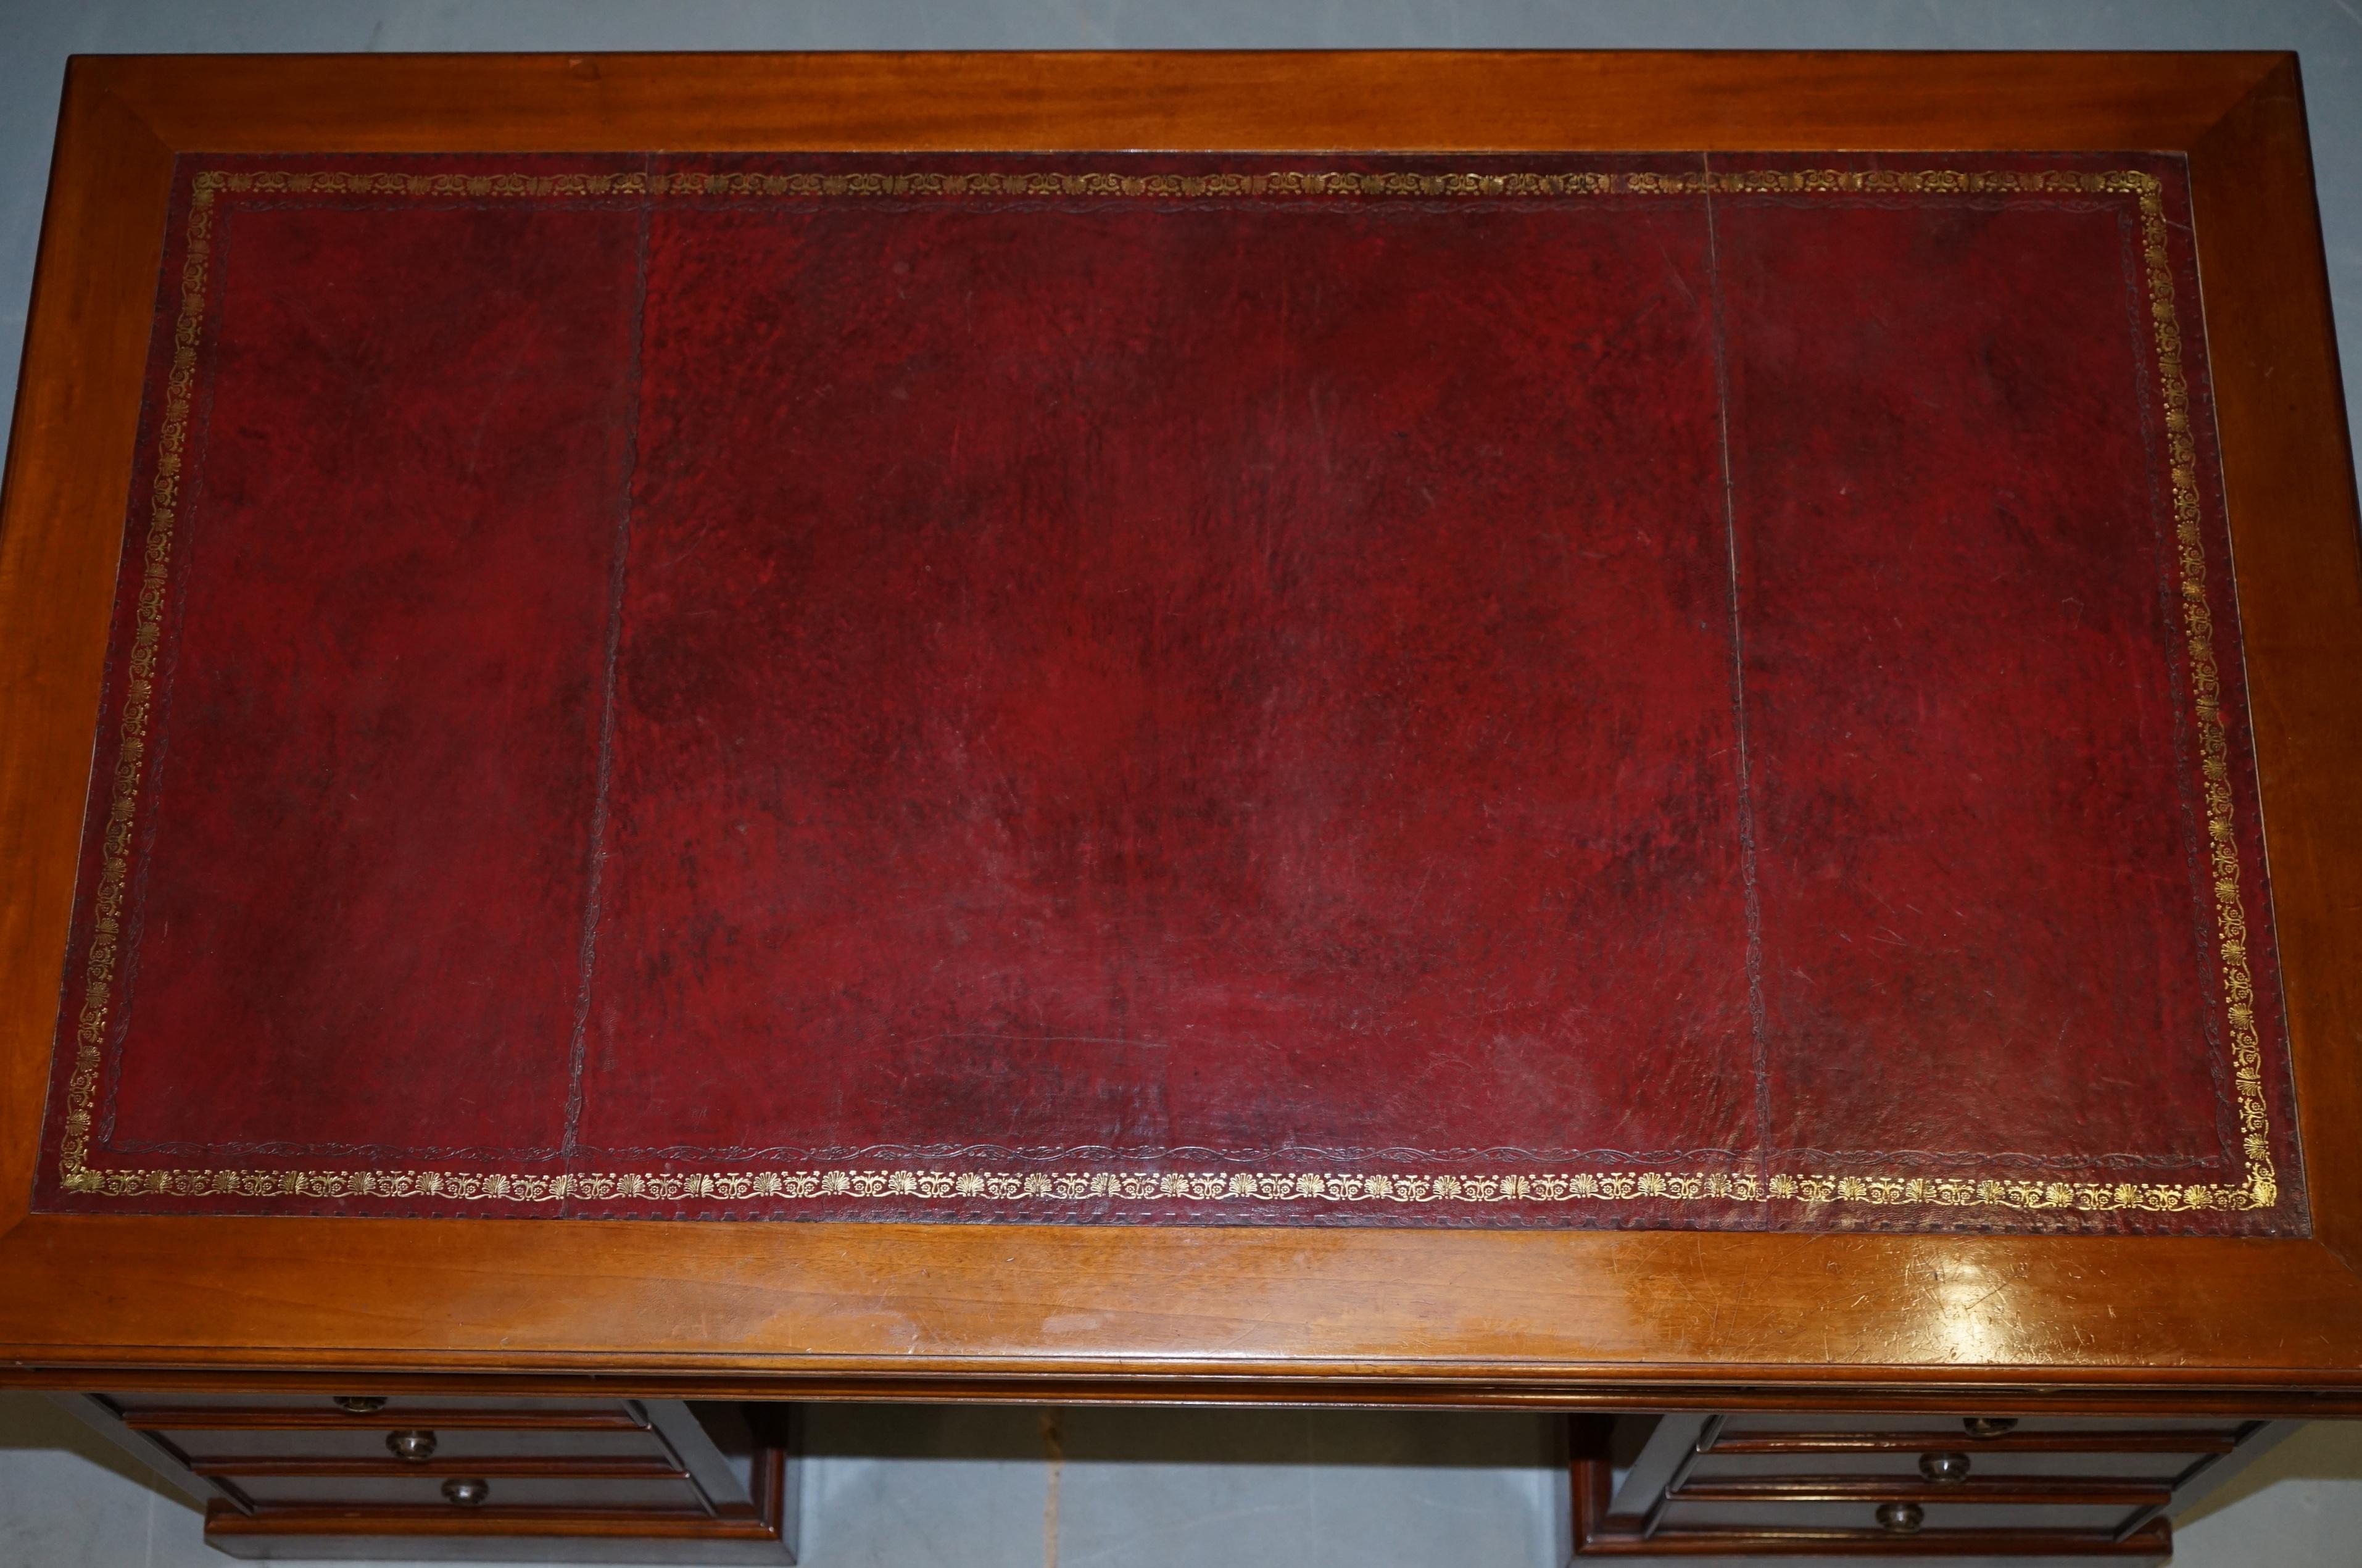 Panelled Cherry Wood Twin Pedestal Partner Desk Oxblood Leather Writing Surface 6